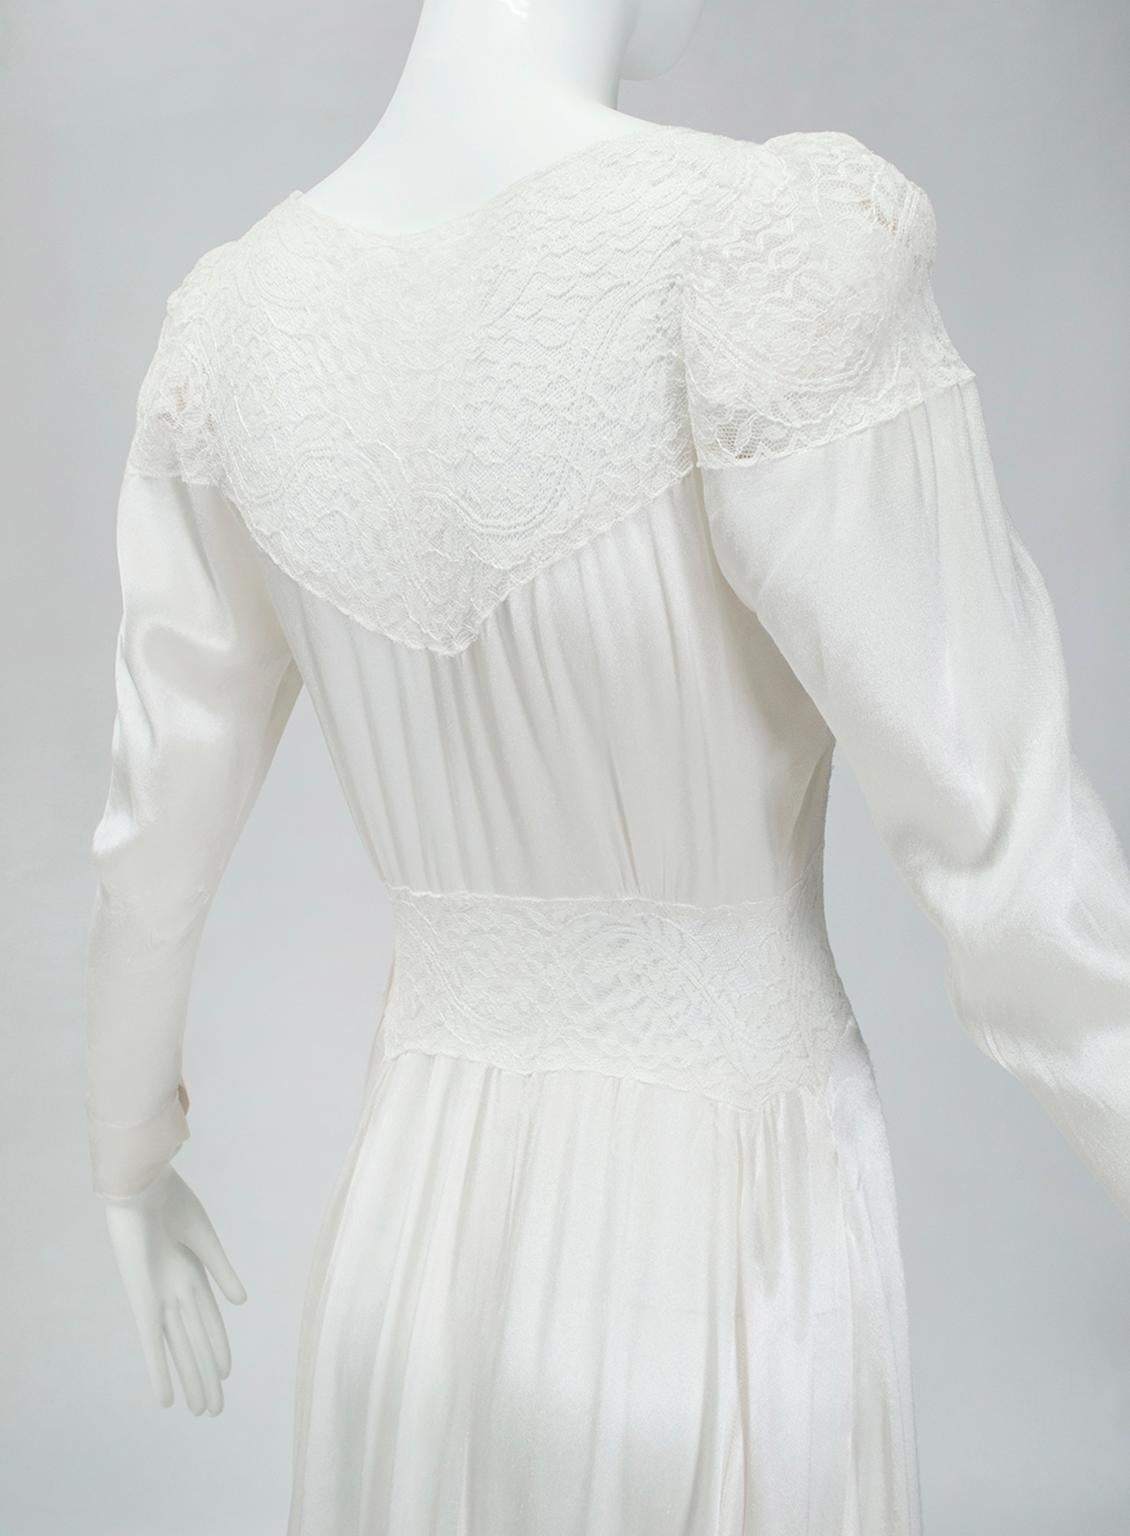 Nearly Naked White Satin Deco Wedding Gown w Transparent Lace Panels - XS, 1930s For Sale 5